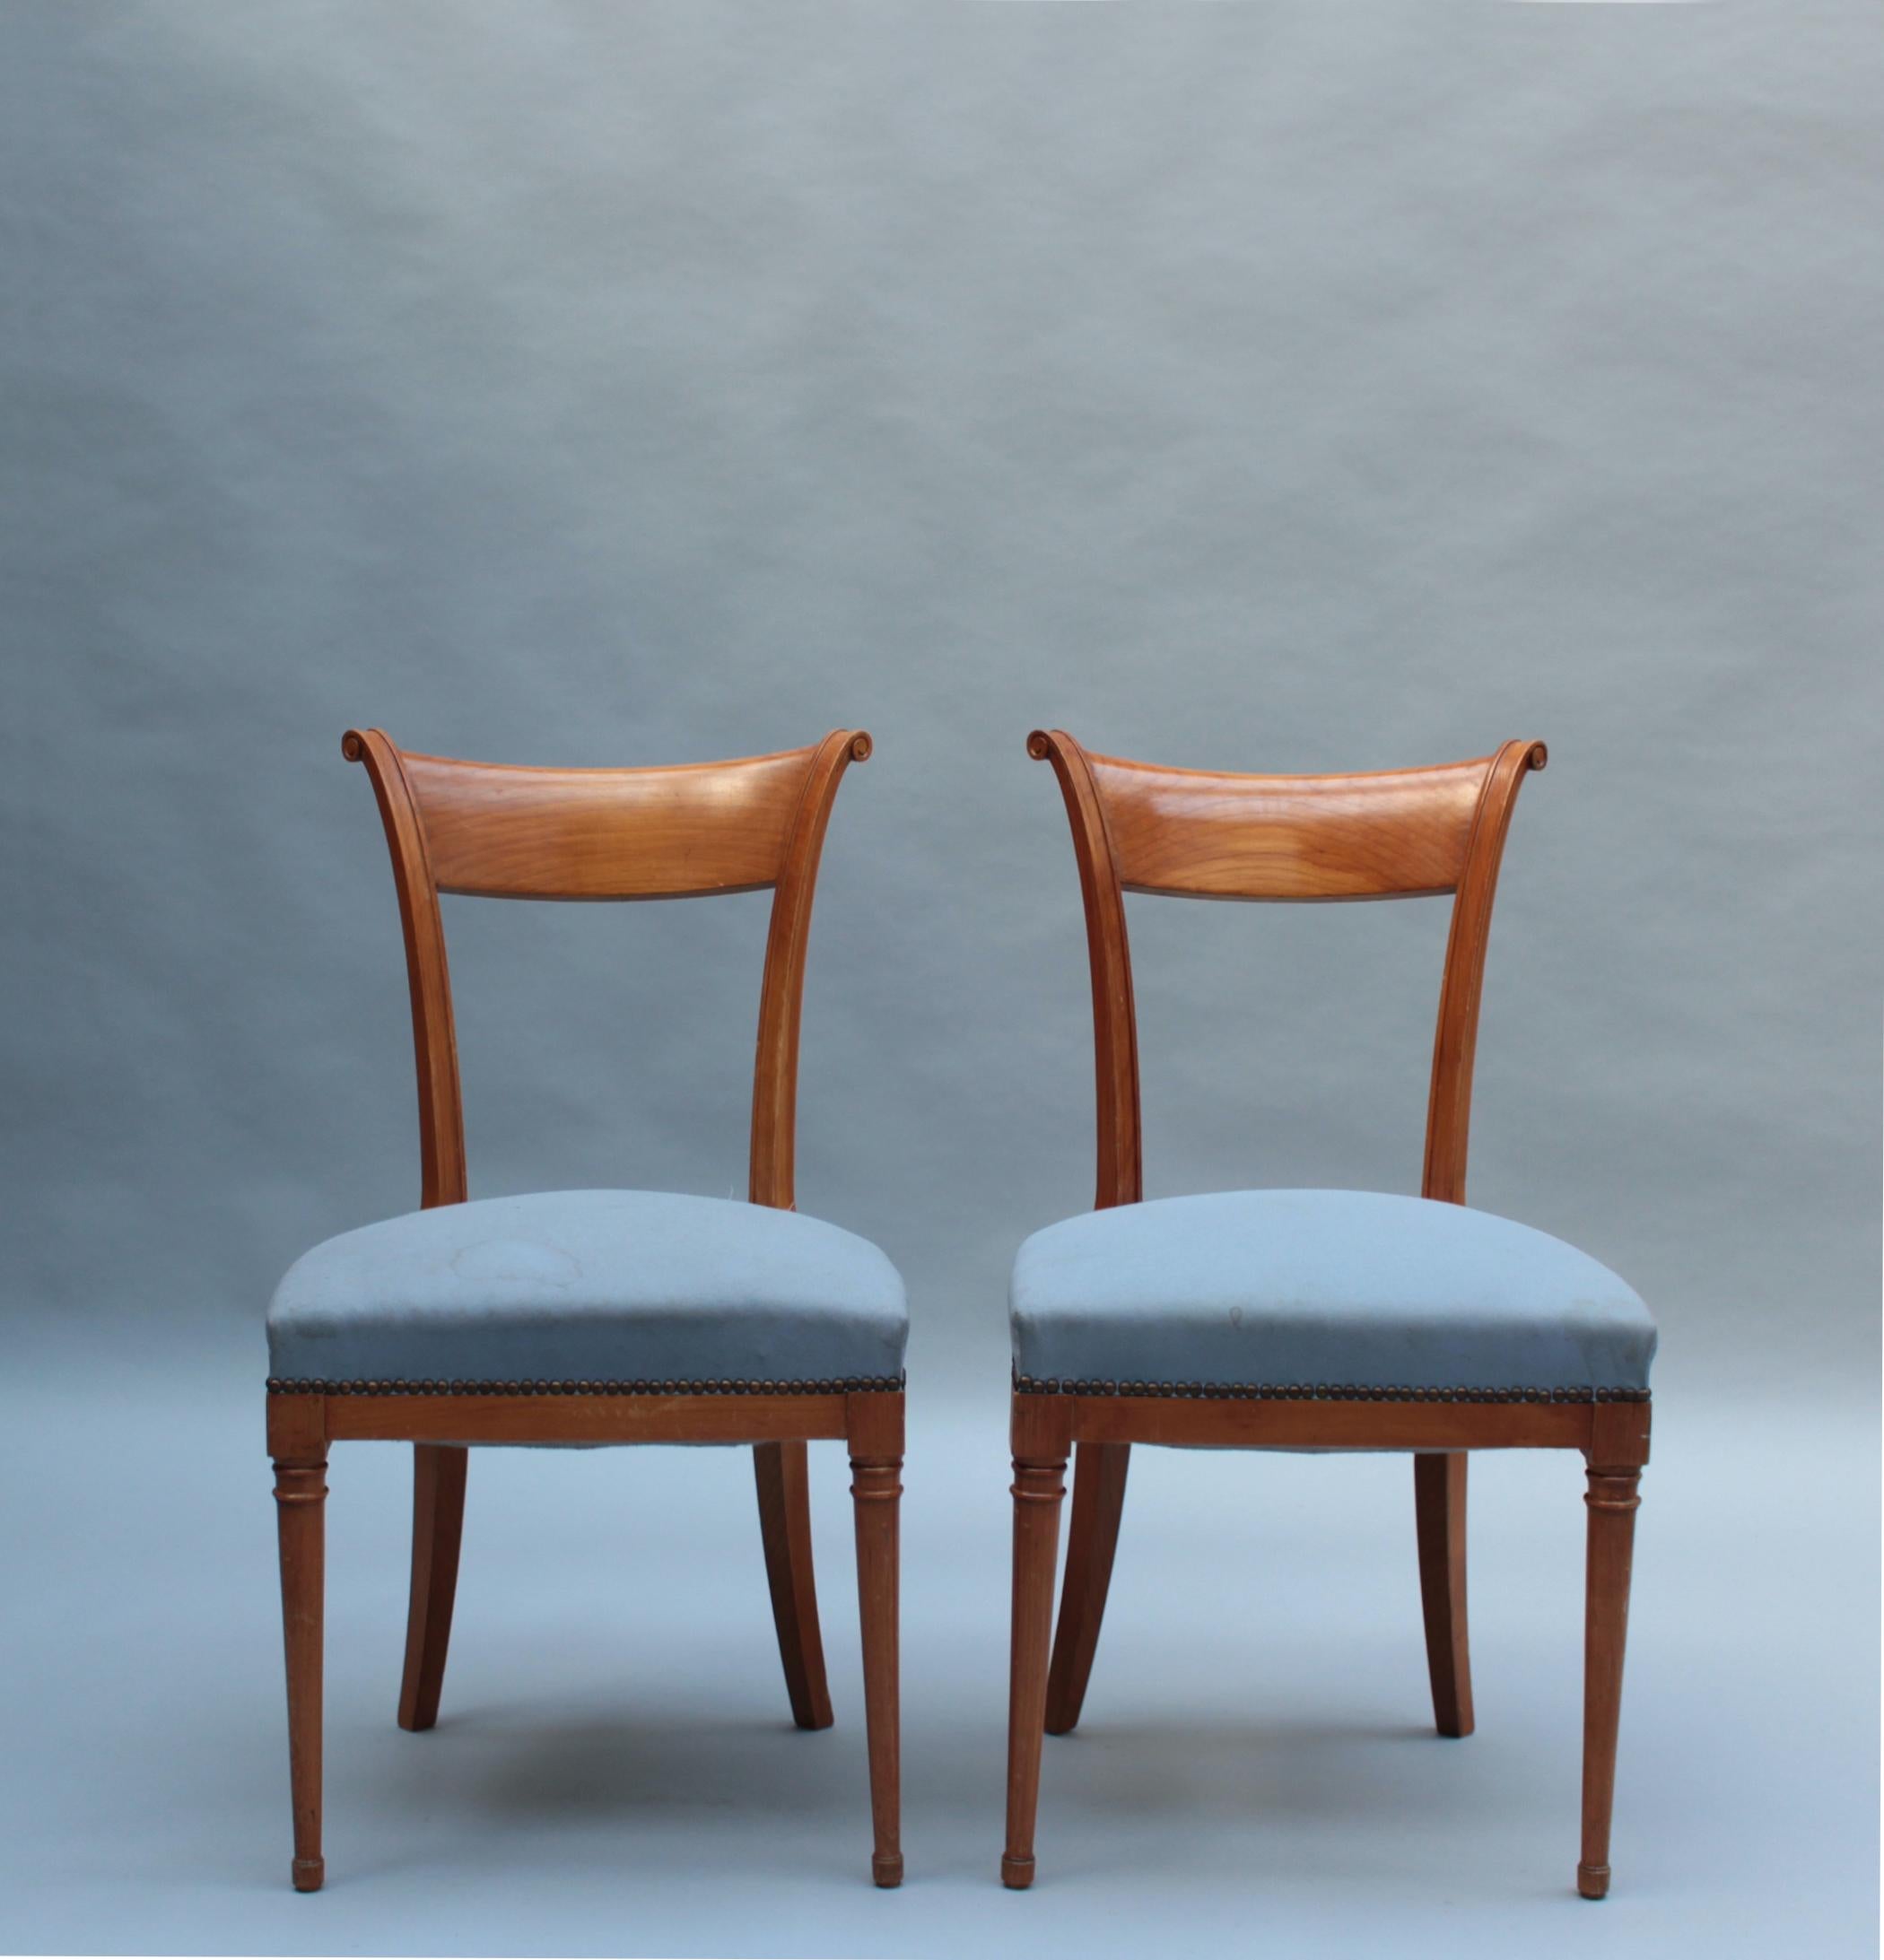 A pair of fine French Art Deco cherrywood side chairs with a curved back, fluted back post, and turned wood details on front legs.

